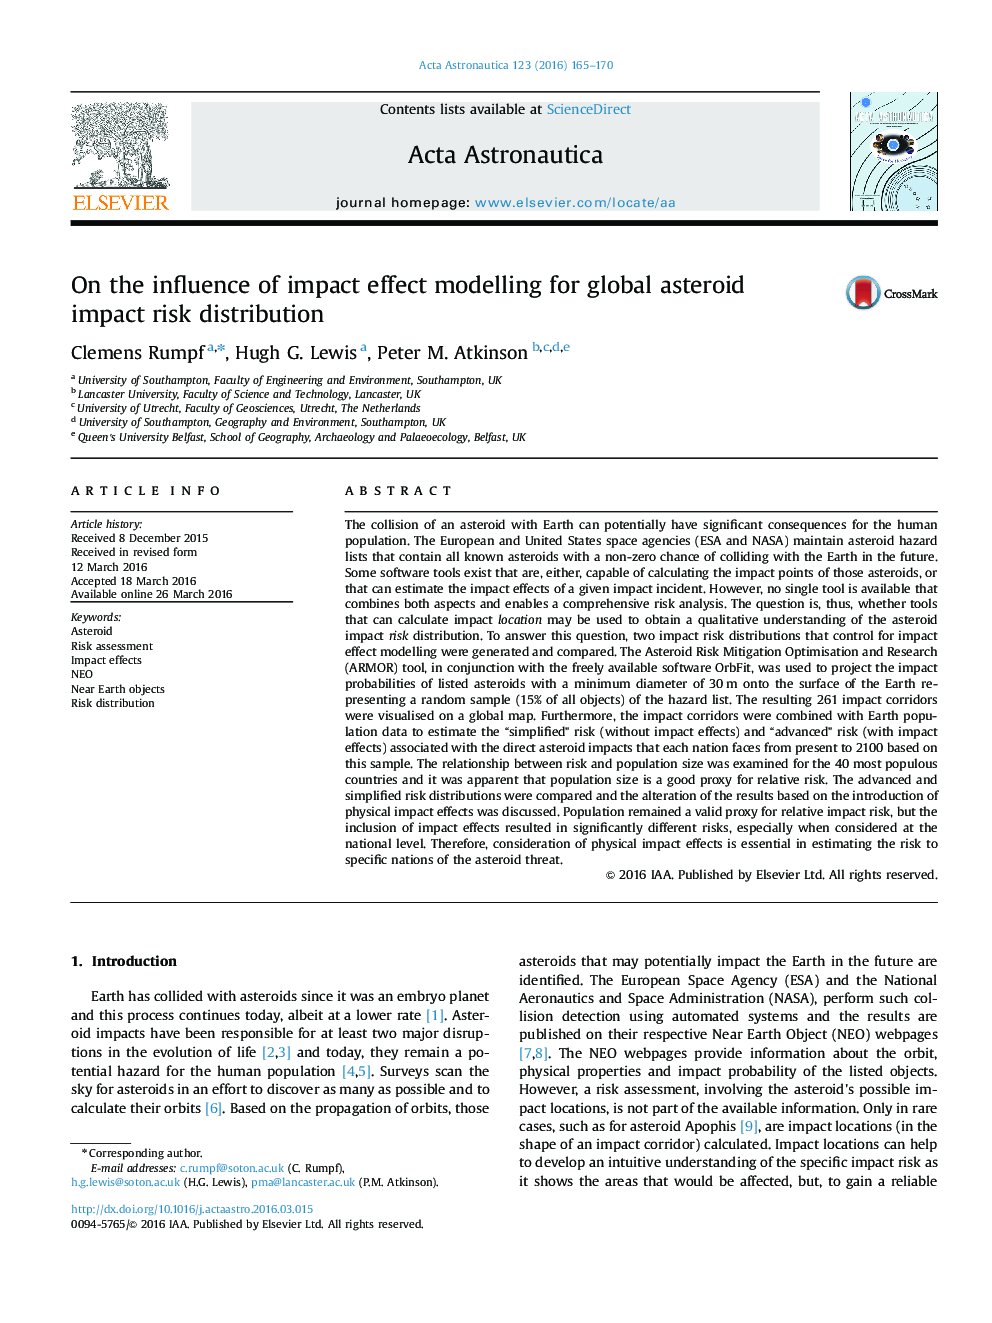 On the influence of impact effect modelling for global asteroid impact risk distribution